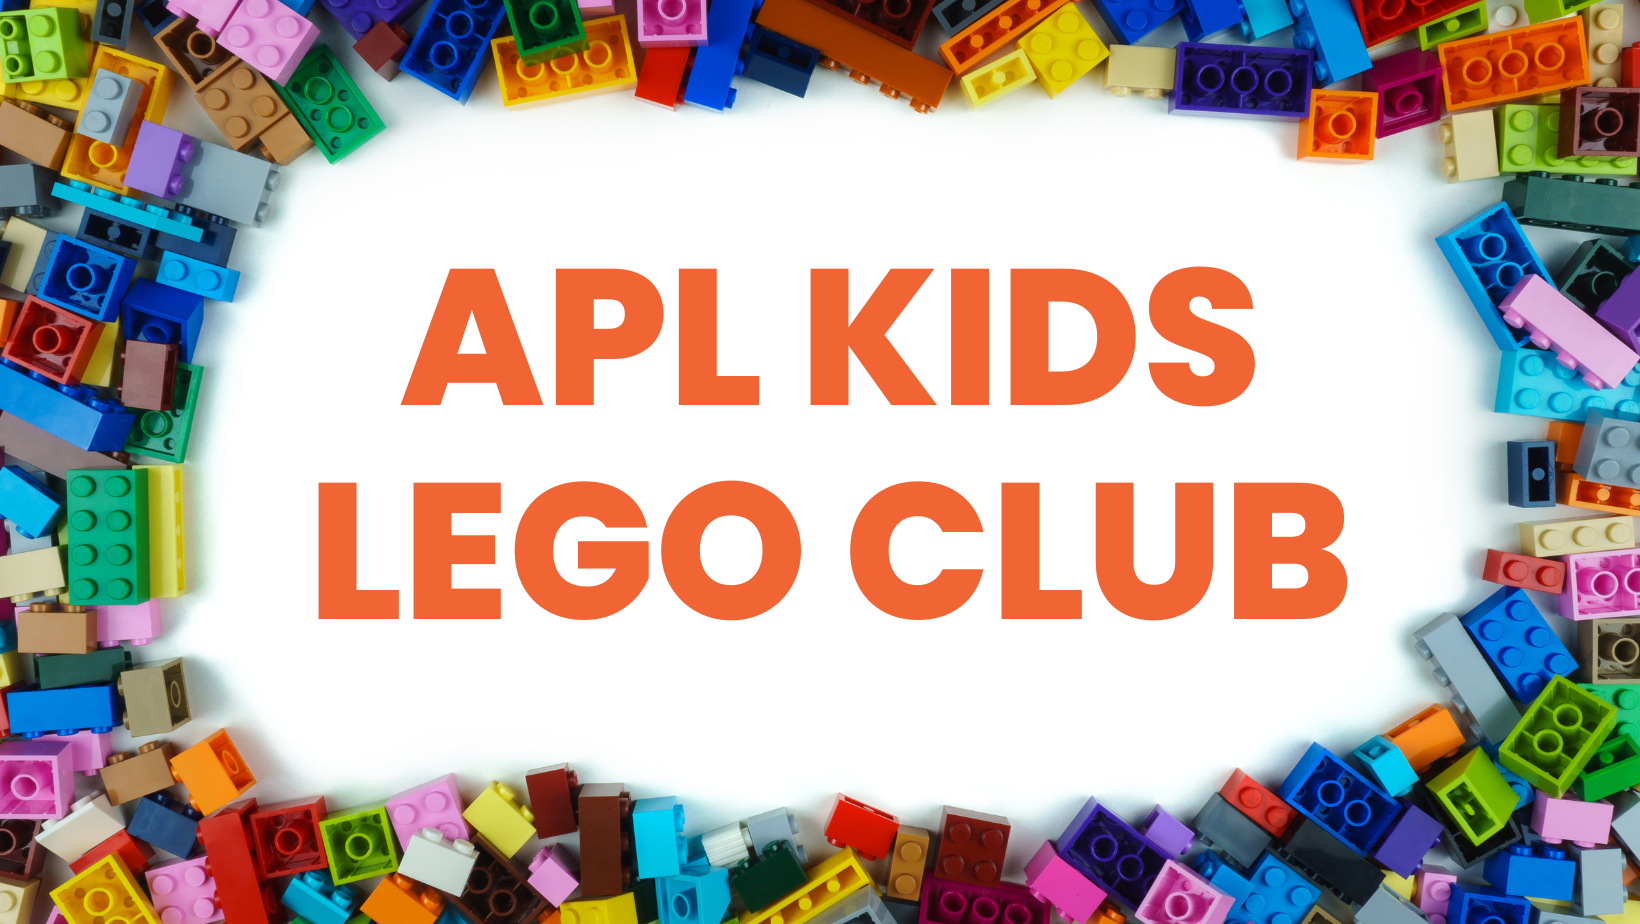 Colorful LEGOS boarder image  around APL Kids LEGO Club text.